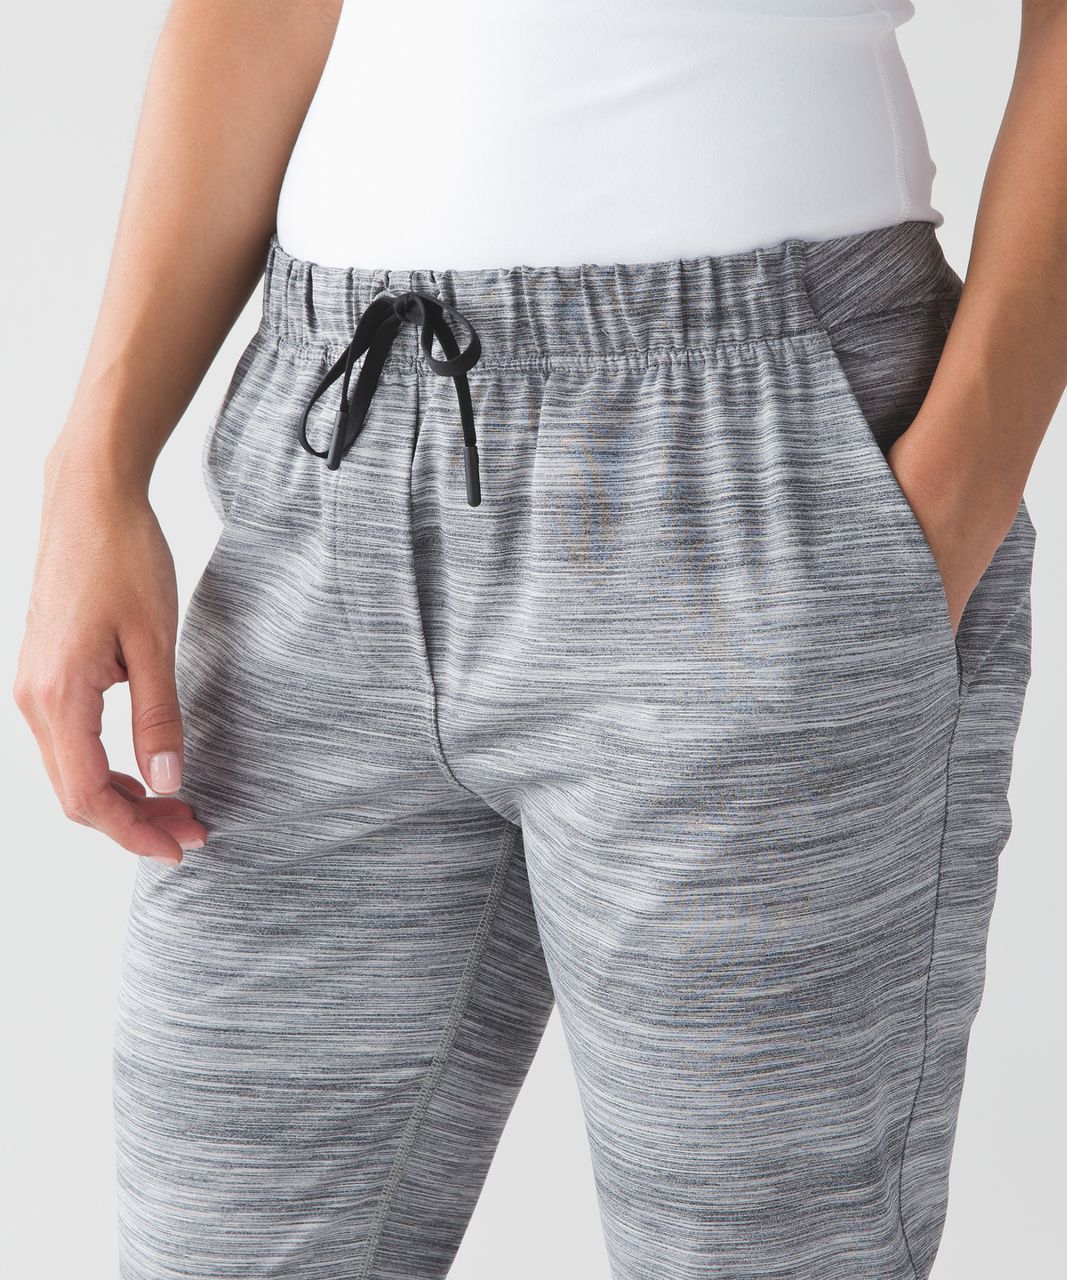 Lululemon Jet Pant - Wee Are From Space Deep Coal Battleship